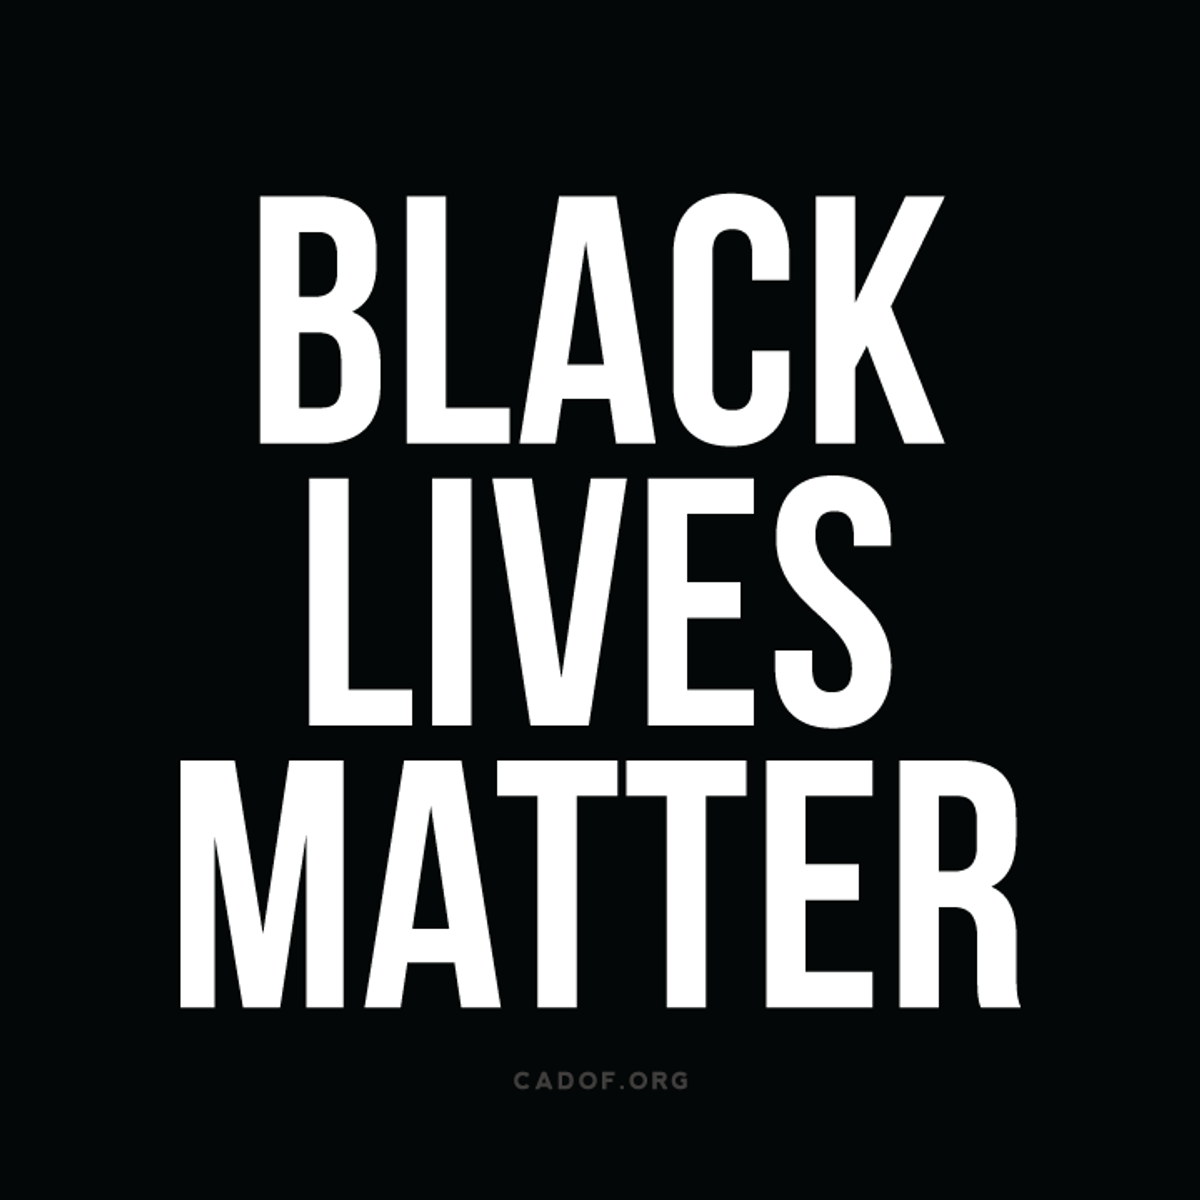 Not Another Black Lives Matter Post